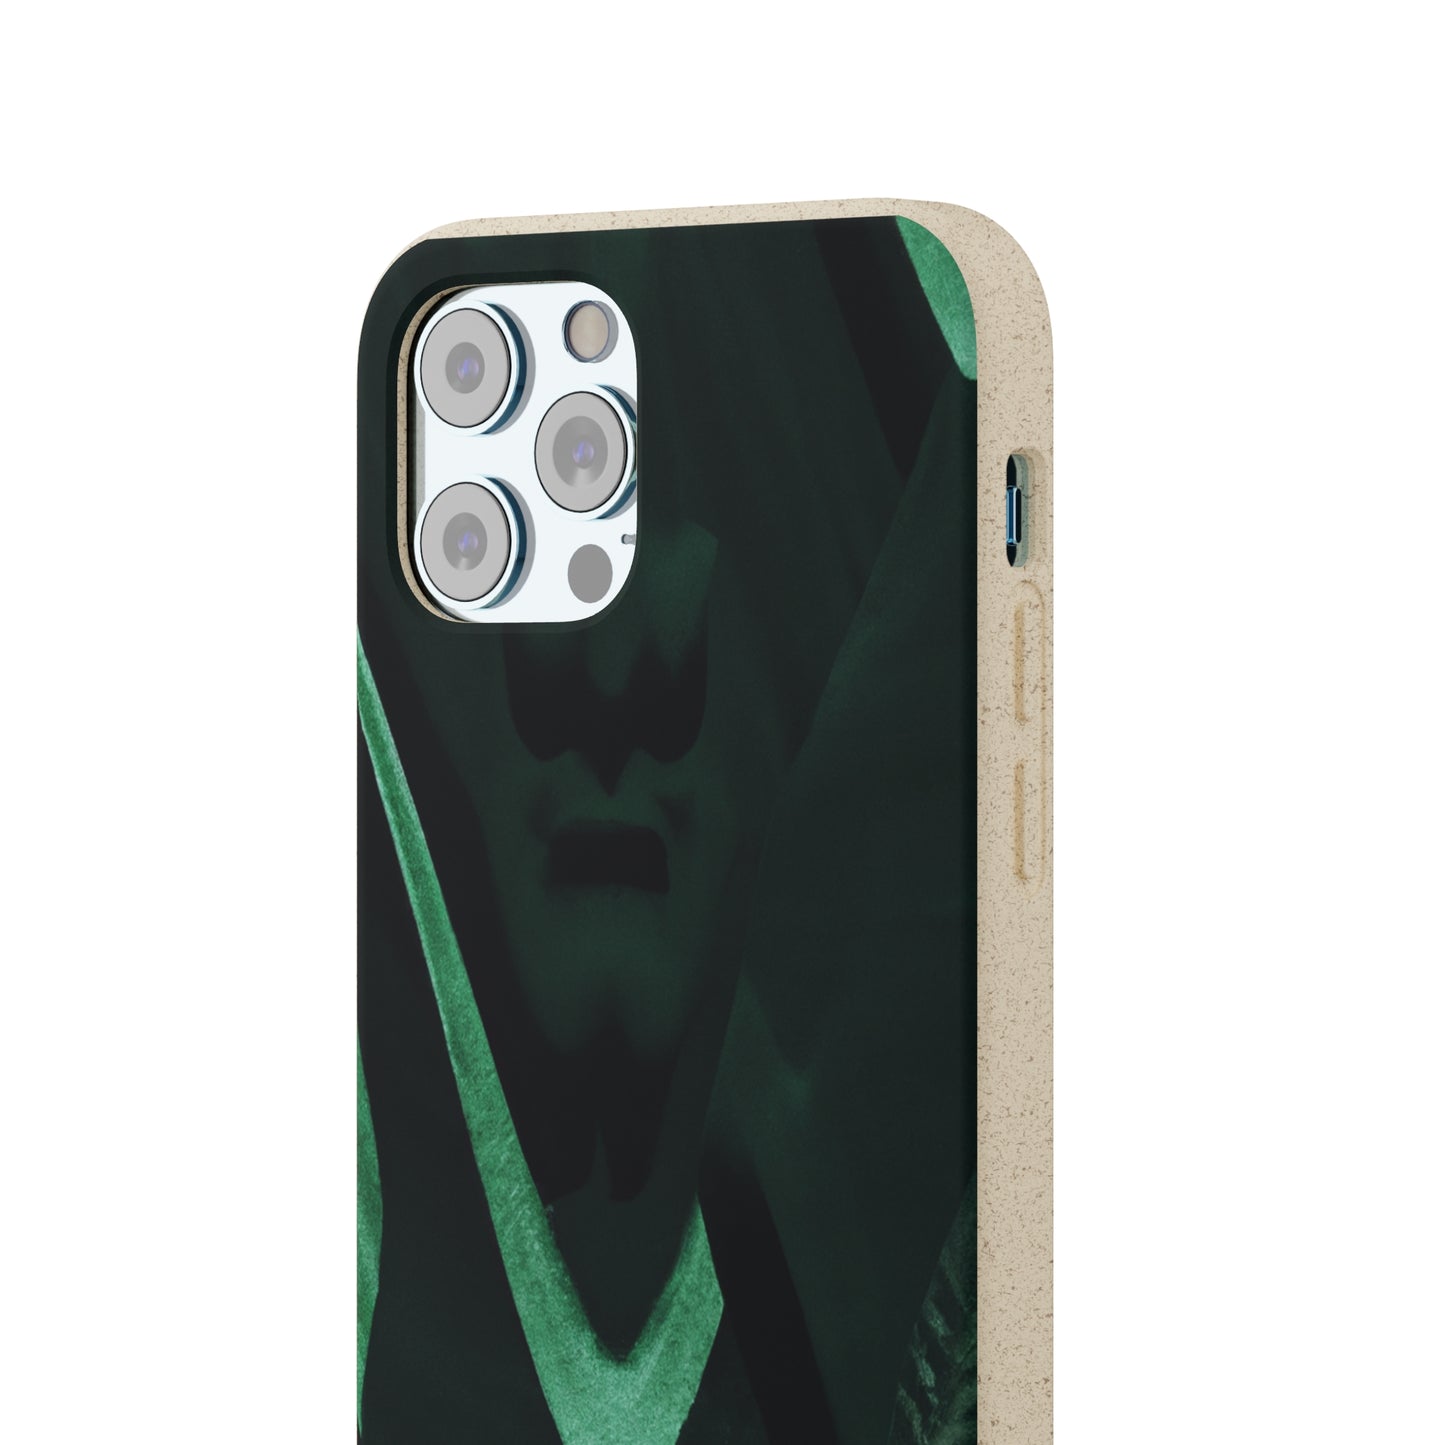 "The Splendor of Nature: An Artistic Fusion of Color, Shape, and Texture" - Bam Boo! Lifestyle Eco-friendly Cases